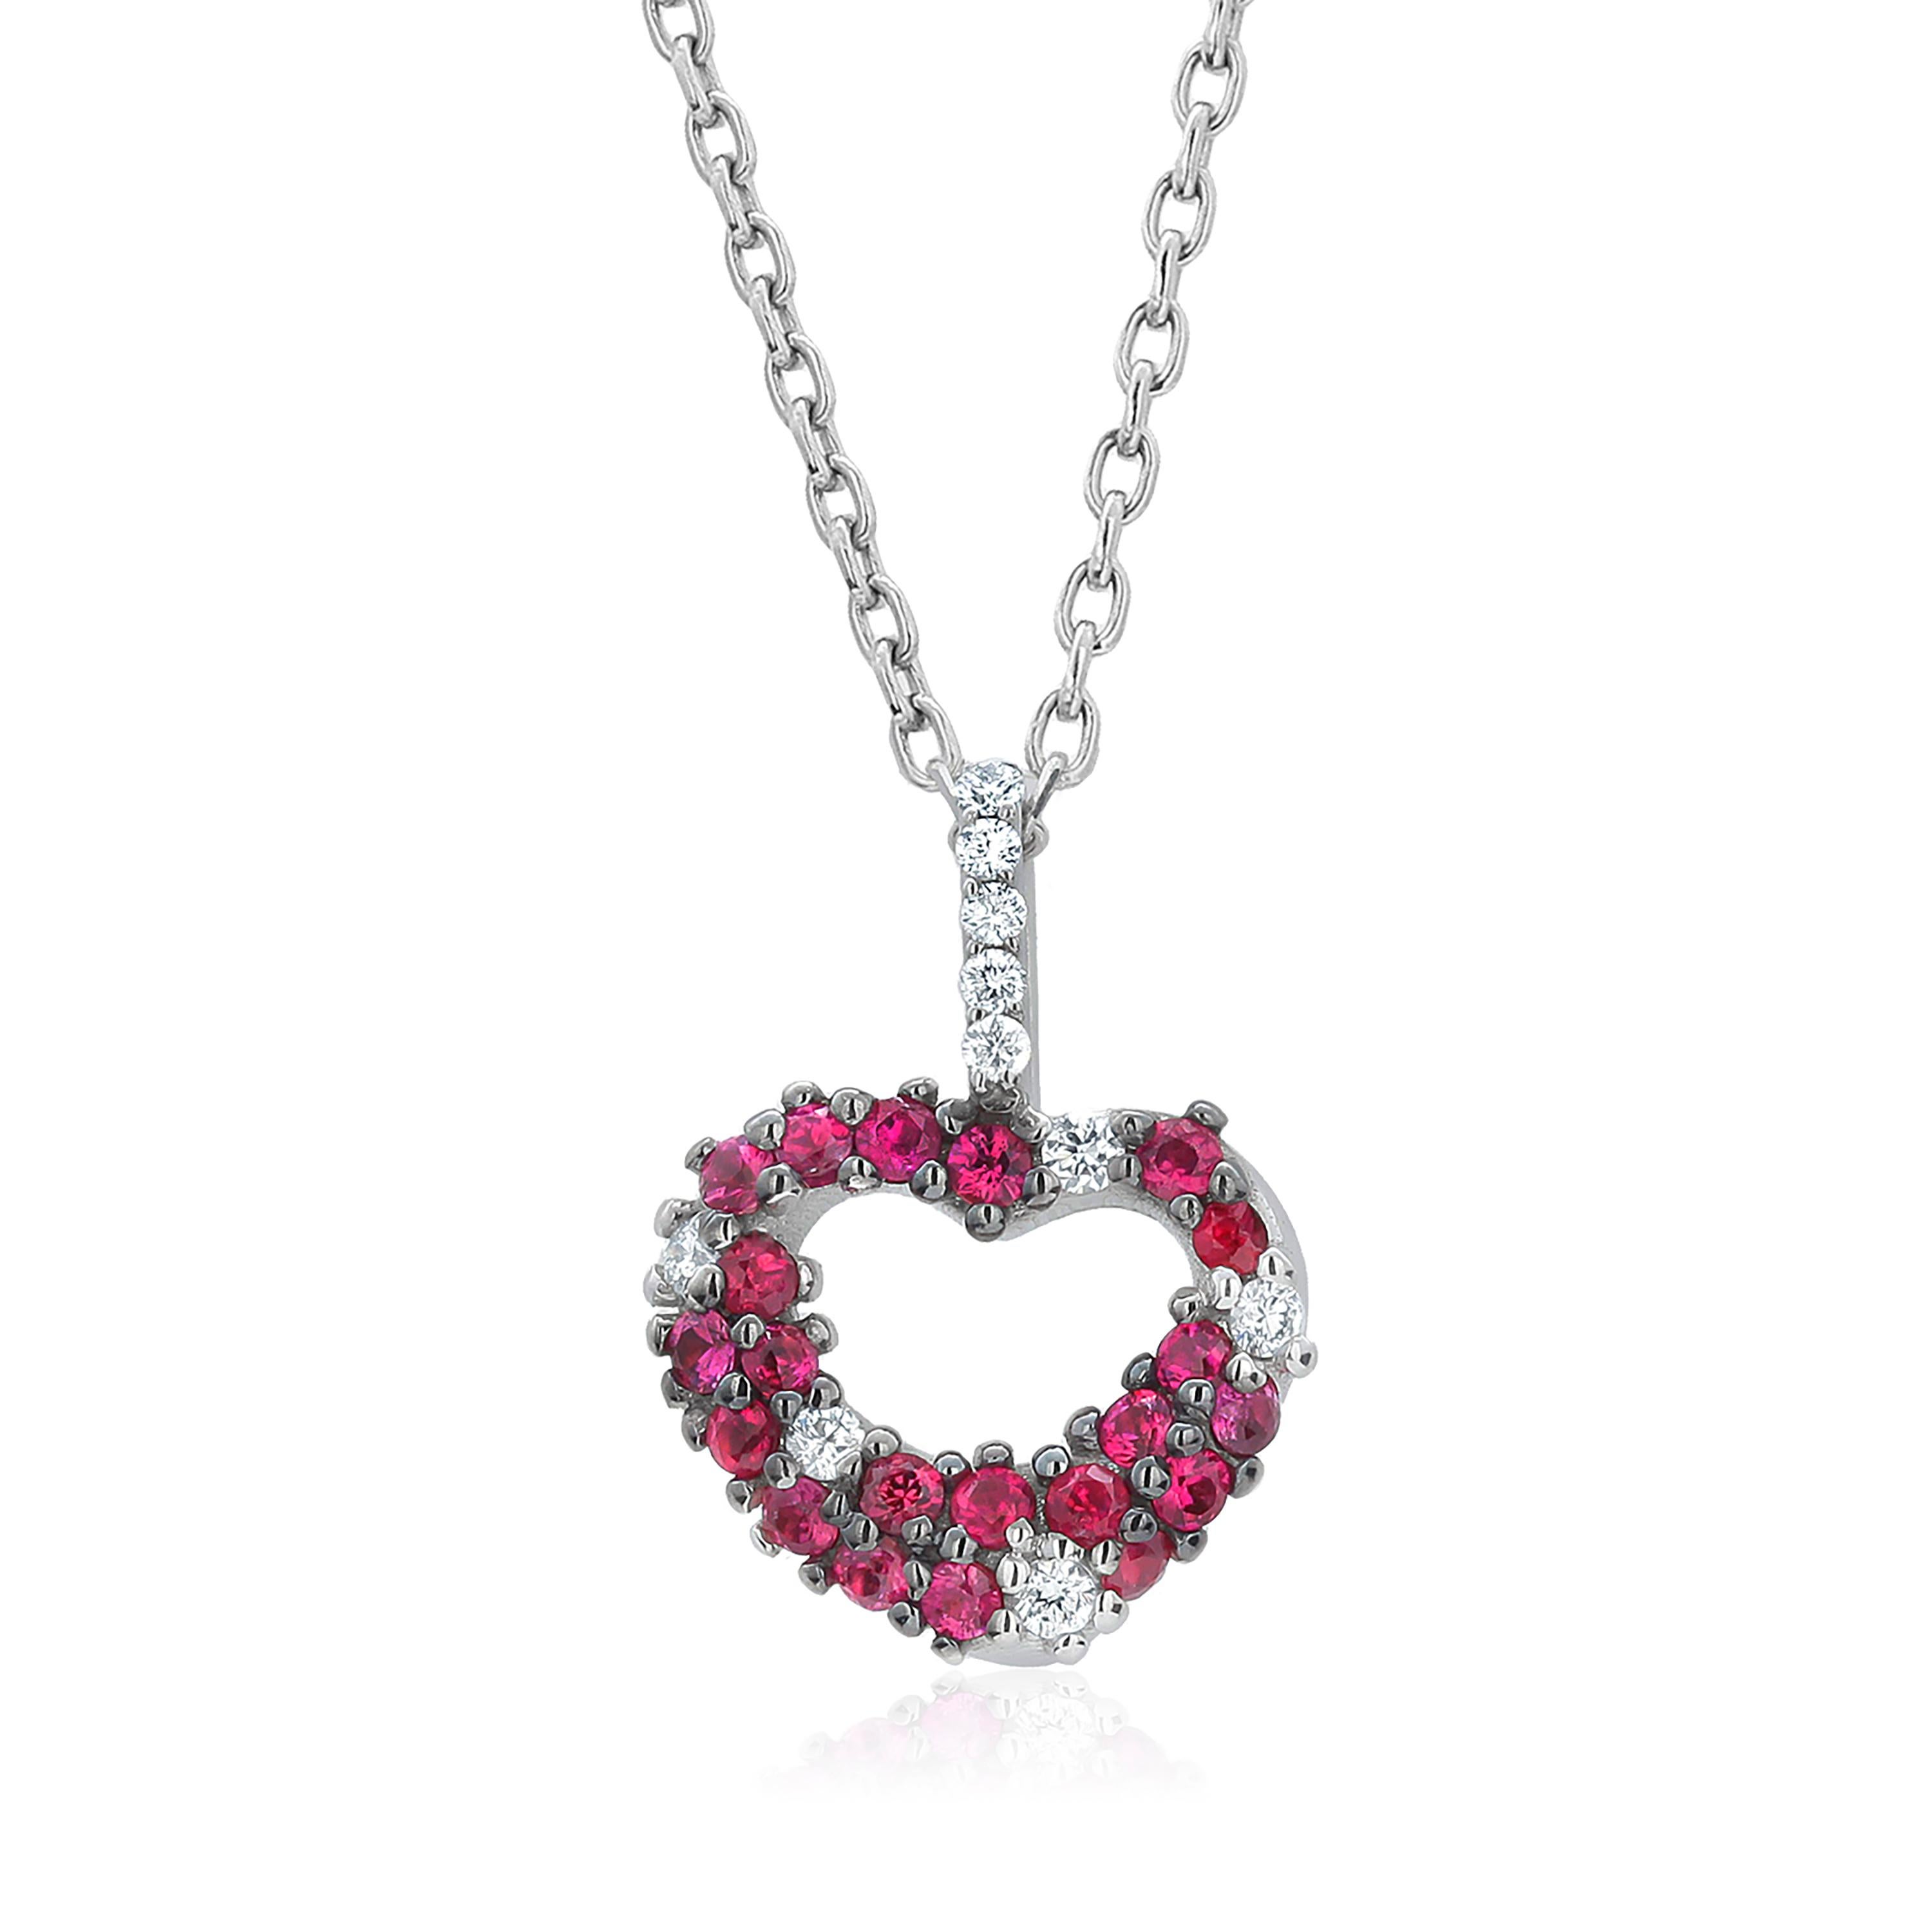 Contemporary Pave Set Ruby Diamond 0.85 Carat Open Heart Shaped White Gold Pendant Necklace